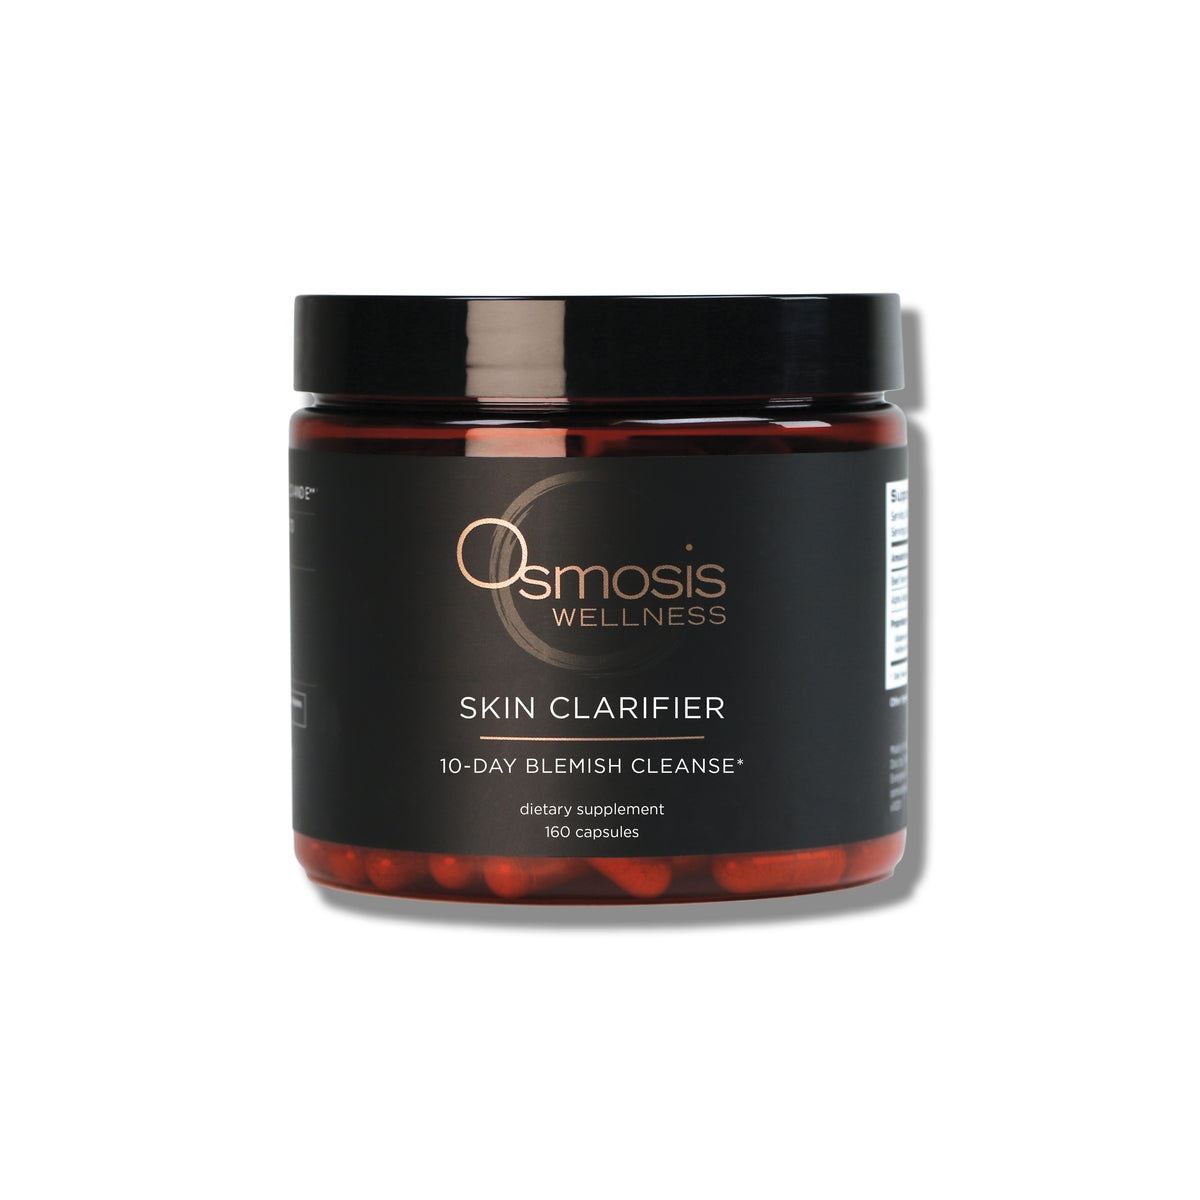 Osmosis + Wellness Skin Clarifier 10 Day Blemish Cleanse